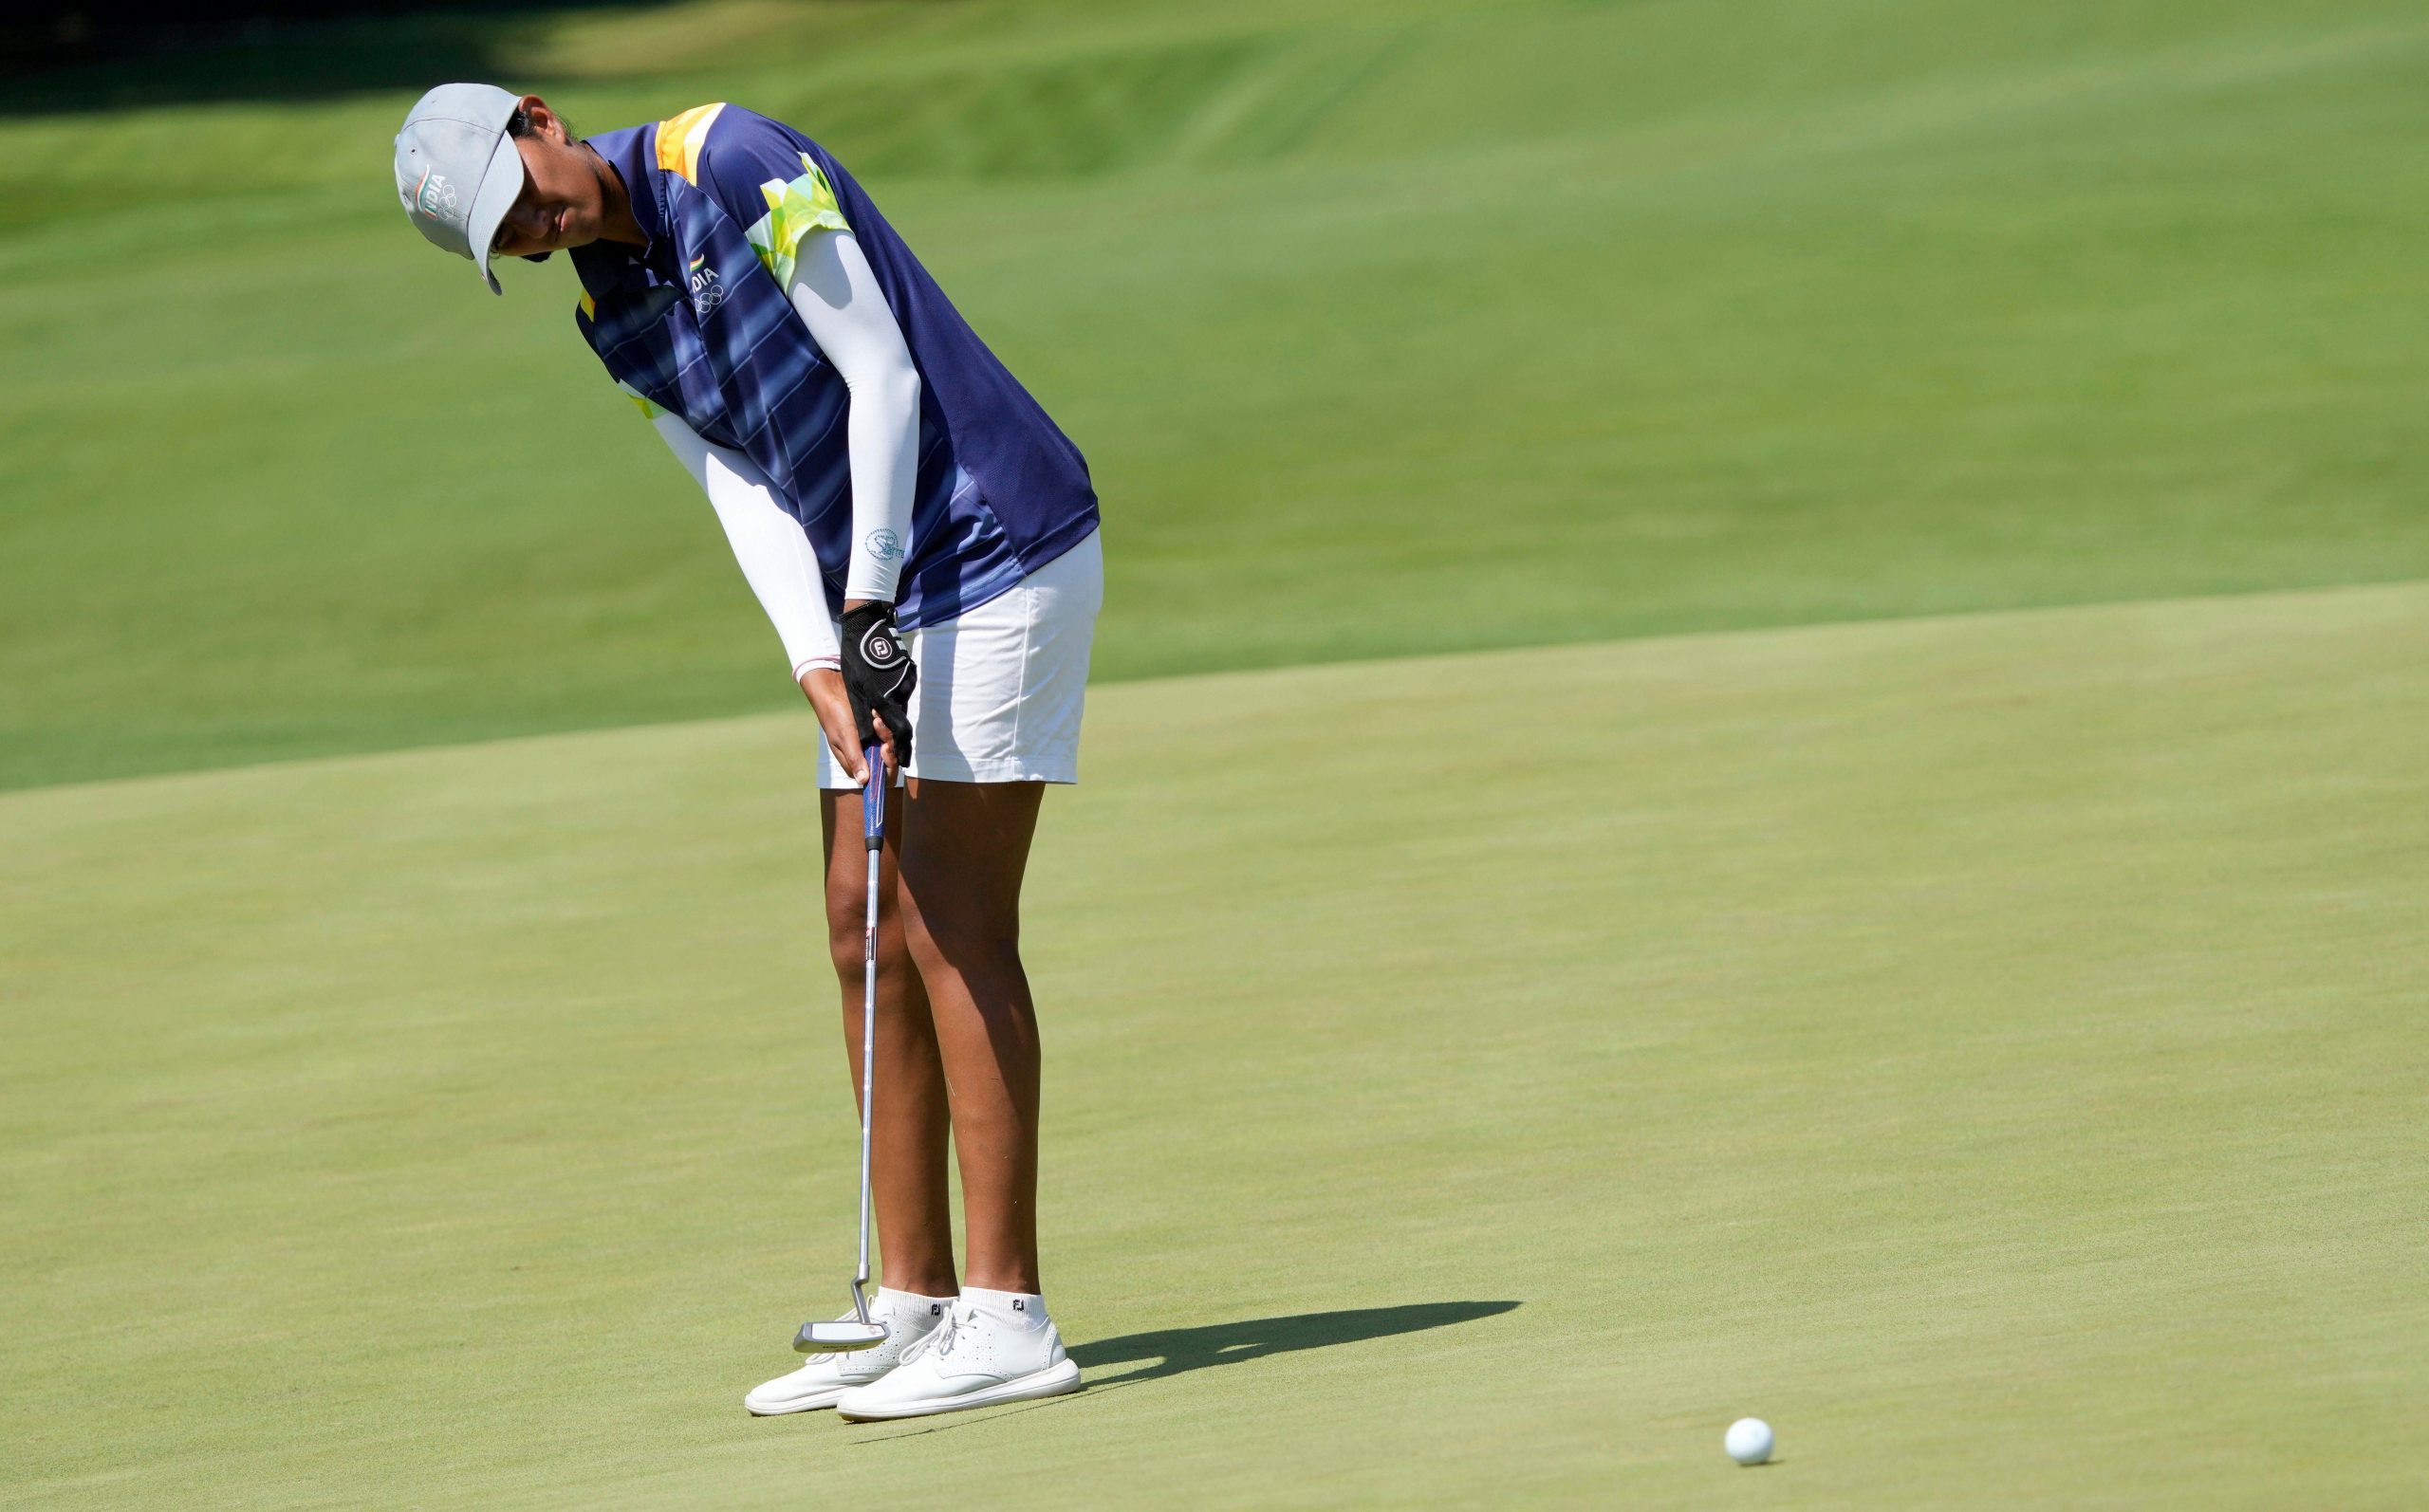 Tokyo Olympics: Golfer Aditi Ashok off to a great start, at second spot after round 1